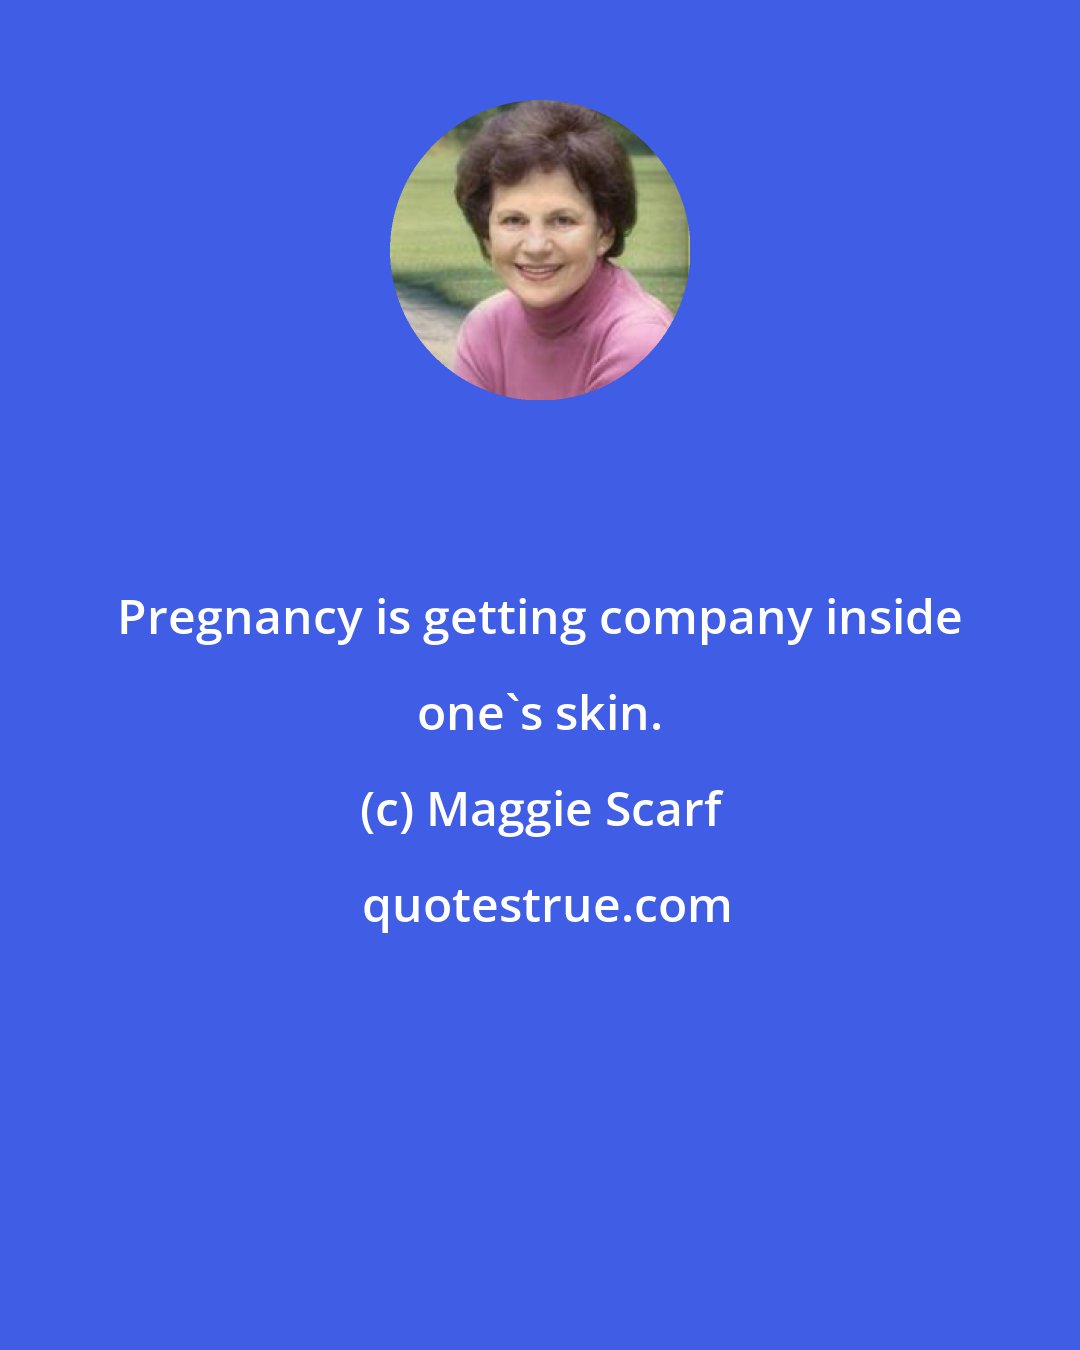 Maggie Scarf: Pregnancy is getting company inside one's skin.